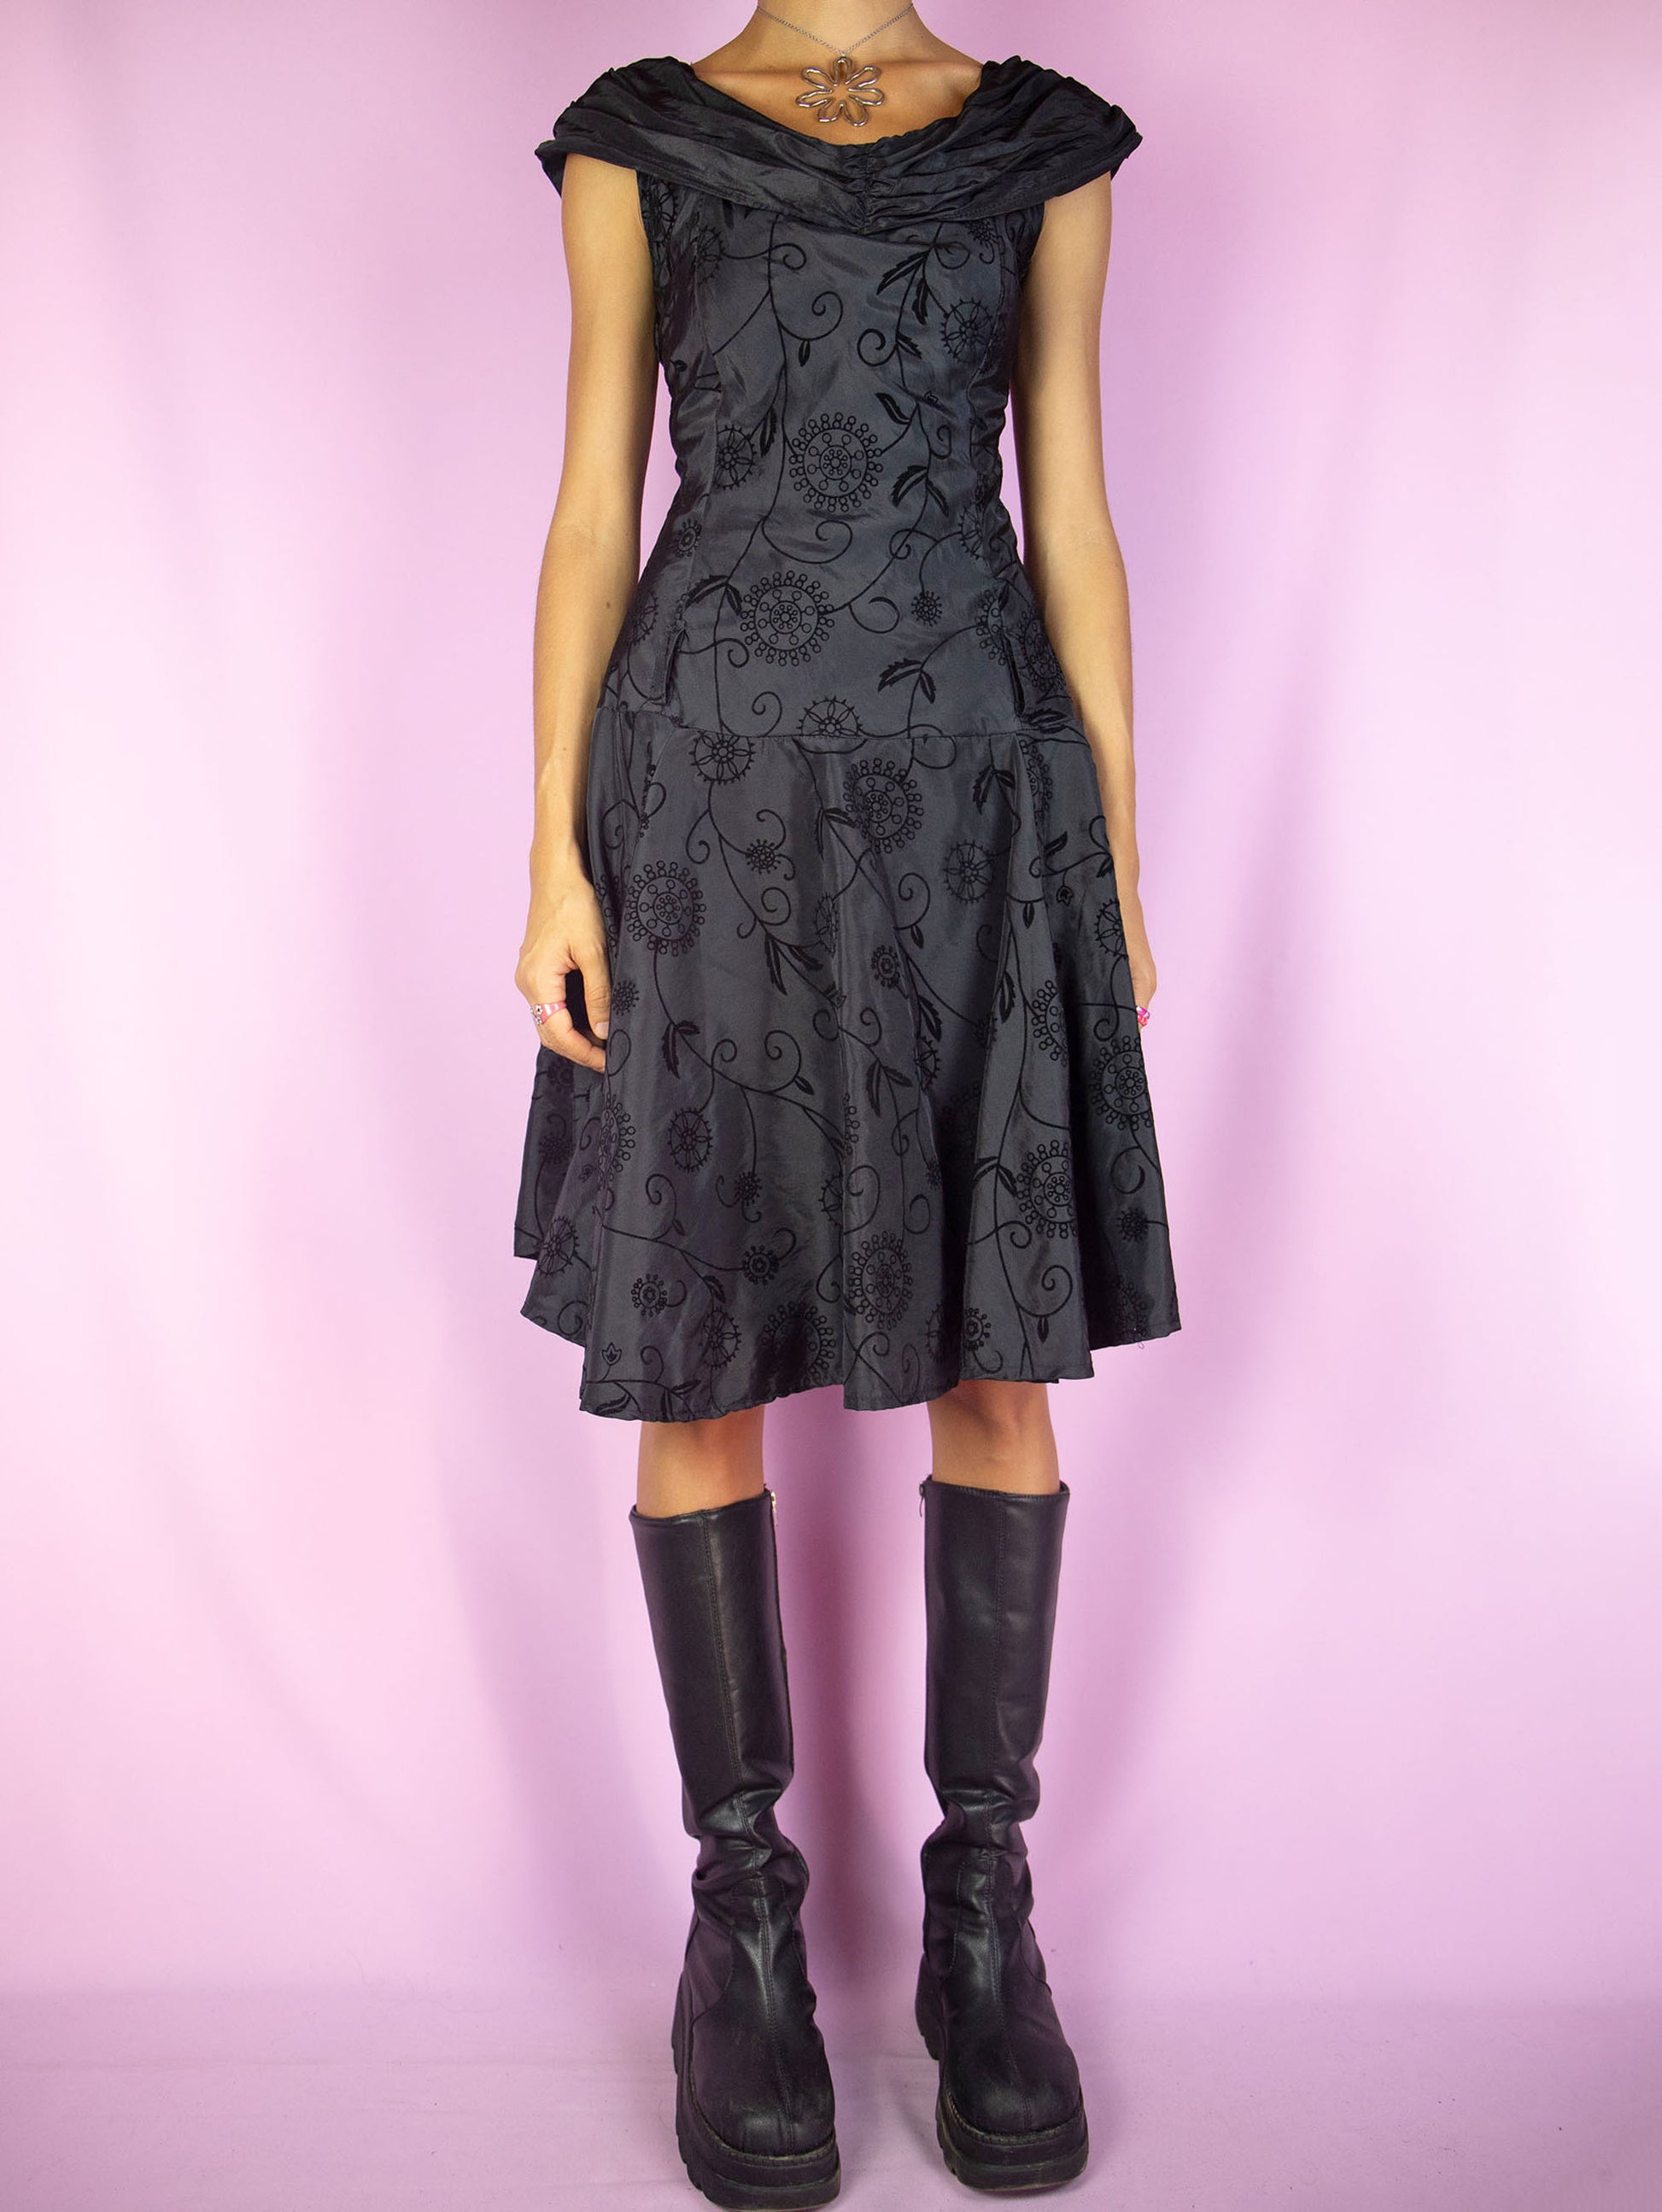 The Vintage 90s Black Flare Midi Dress is a black sleeveless flared dress with floral velvet details and side zipper closure. Fairy grunge whimsygoth 1990S party night dress.